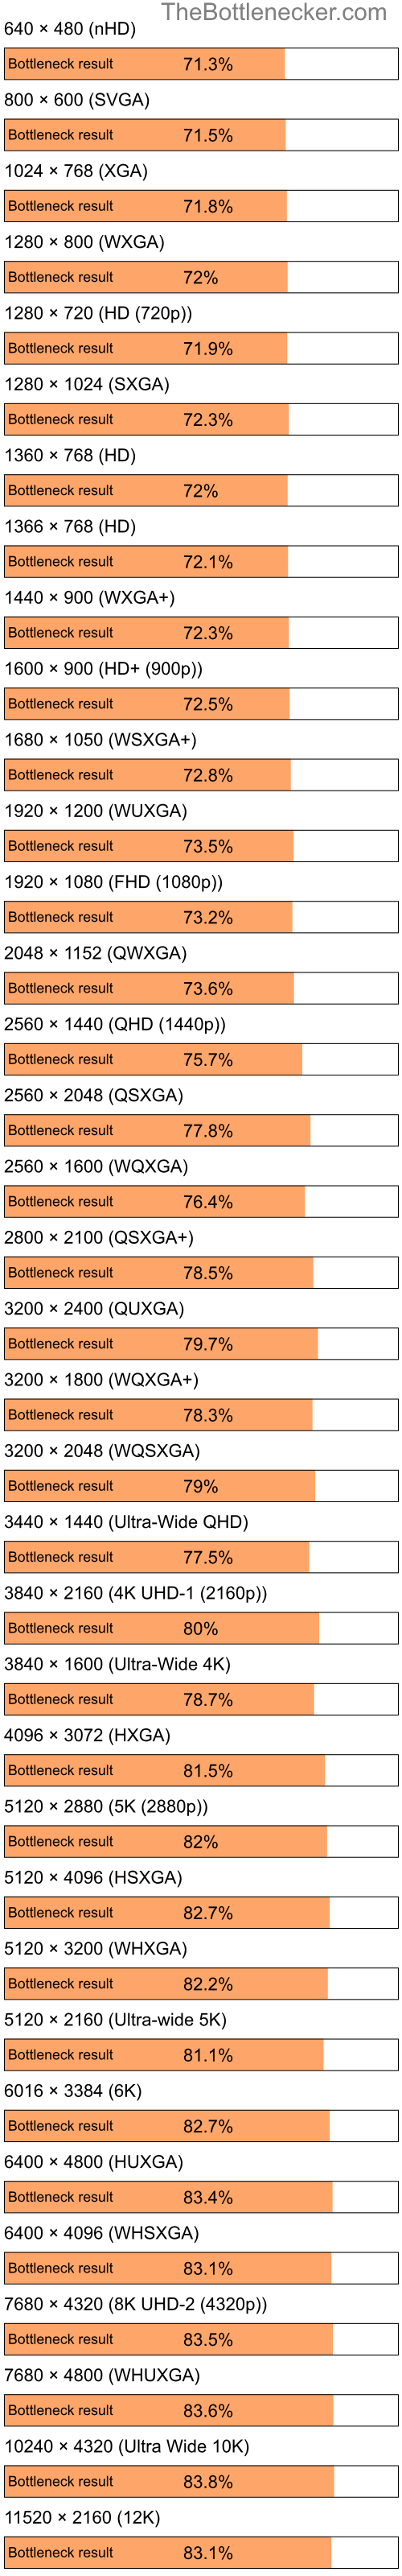 Bottleneck results by resolution for Intel Pentium 4 and NVIDIA GeForce 7100 GS in General Tasks